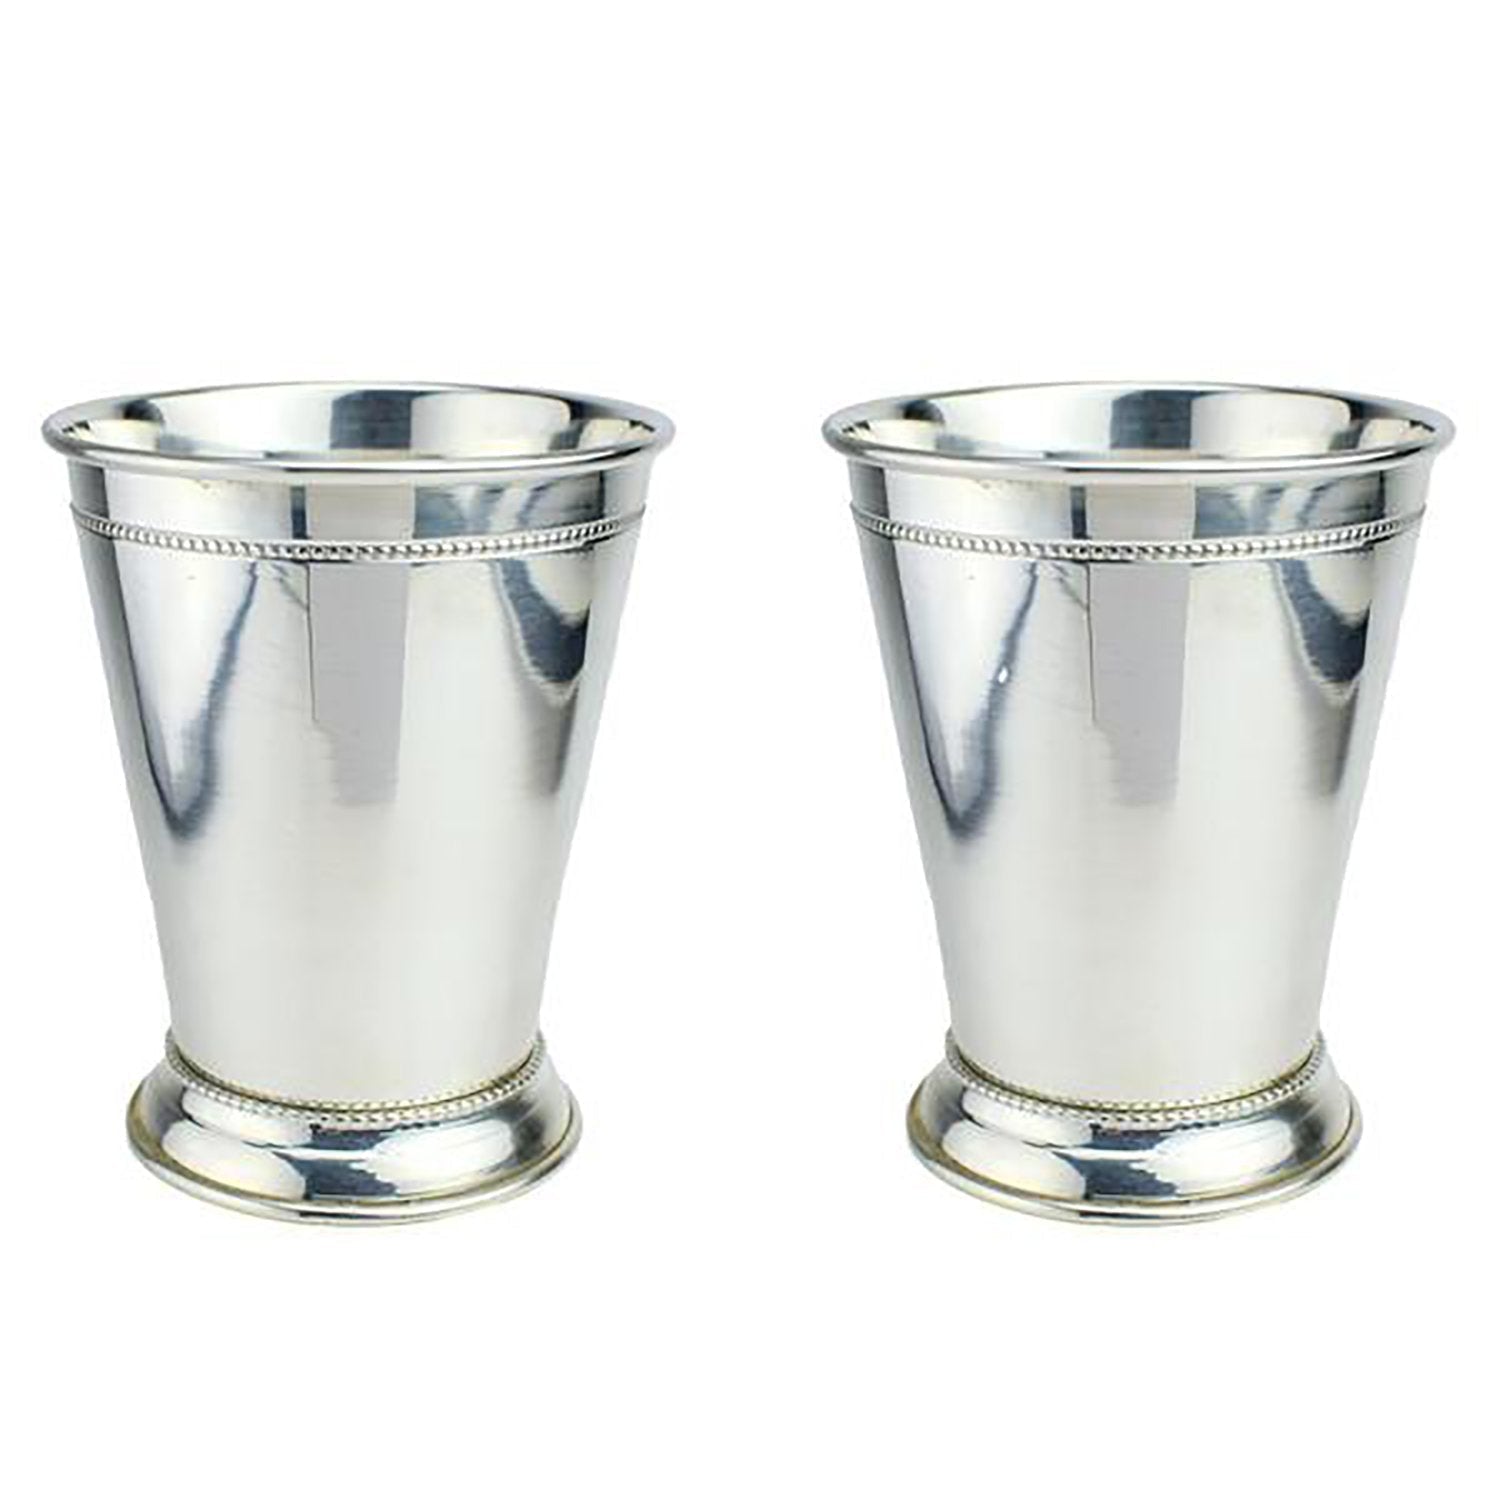 Prince of Scots Copper Mint Julep Cup w/Pure Silver Plate (Set of 2)-Mint Julep-Prince of Scots-00810032751593-2MintJulepSP-Prince of Scots